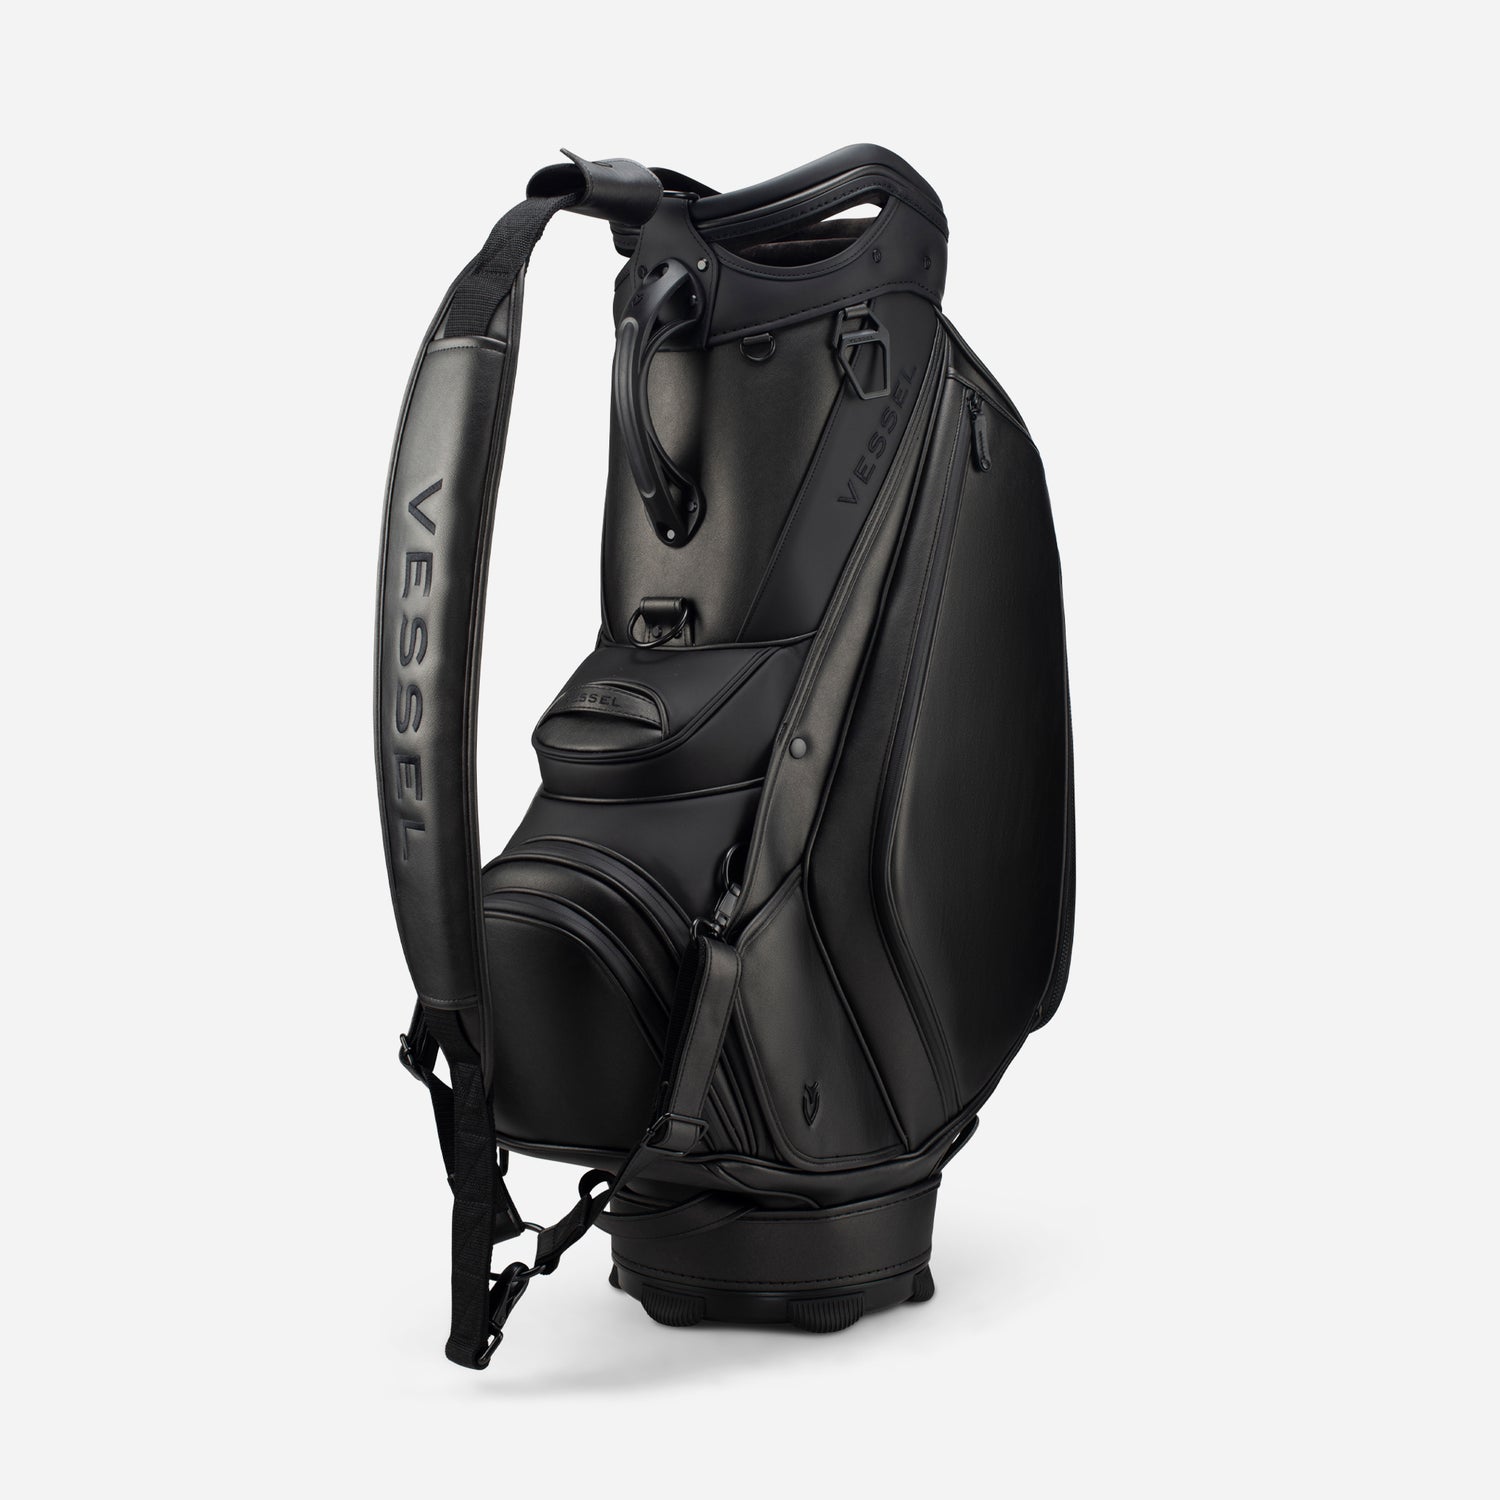 Experience Unmatched Performance: Introducing the Prime 2.0 Staff Bag